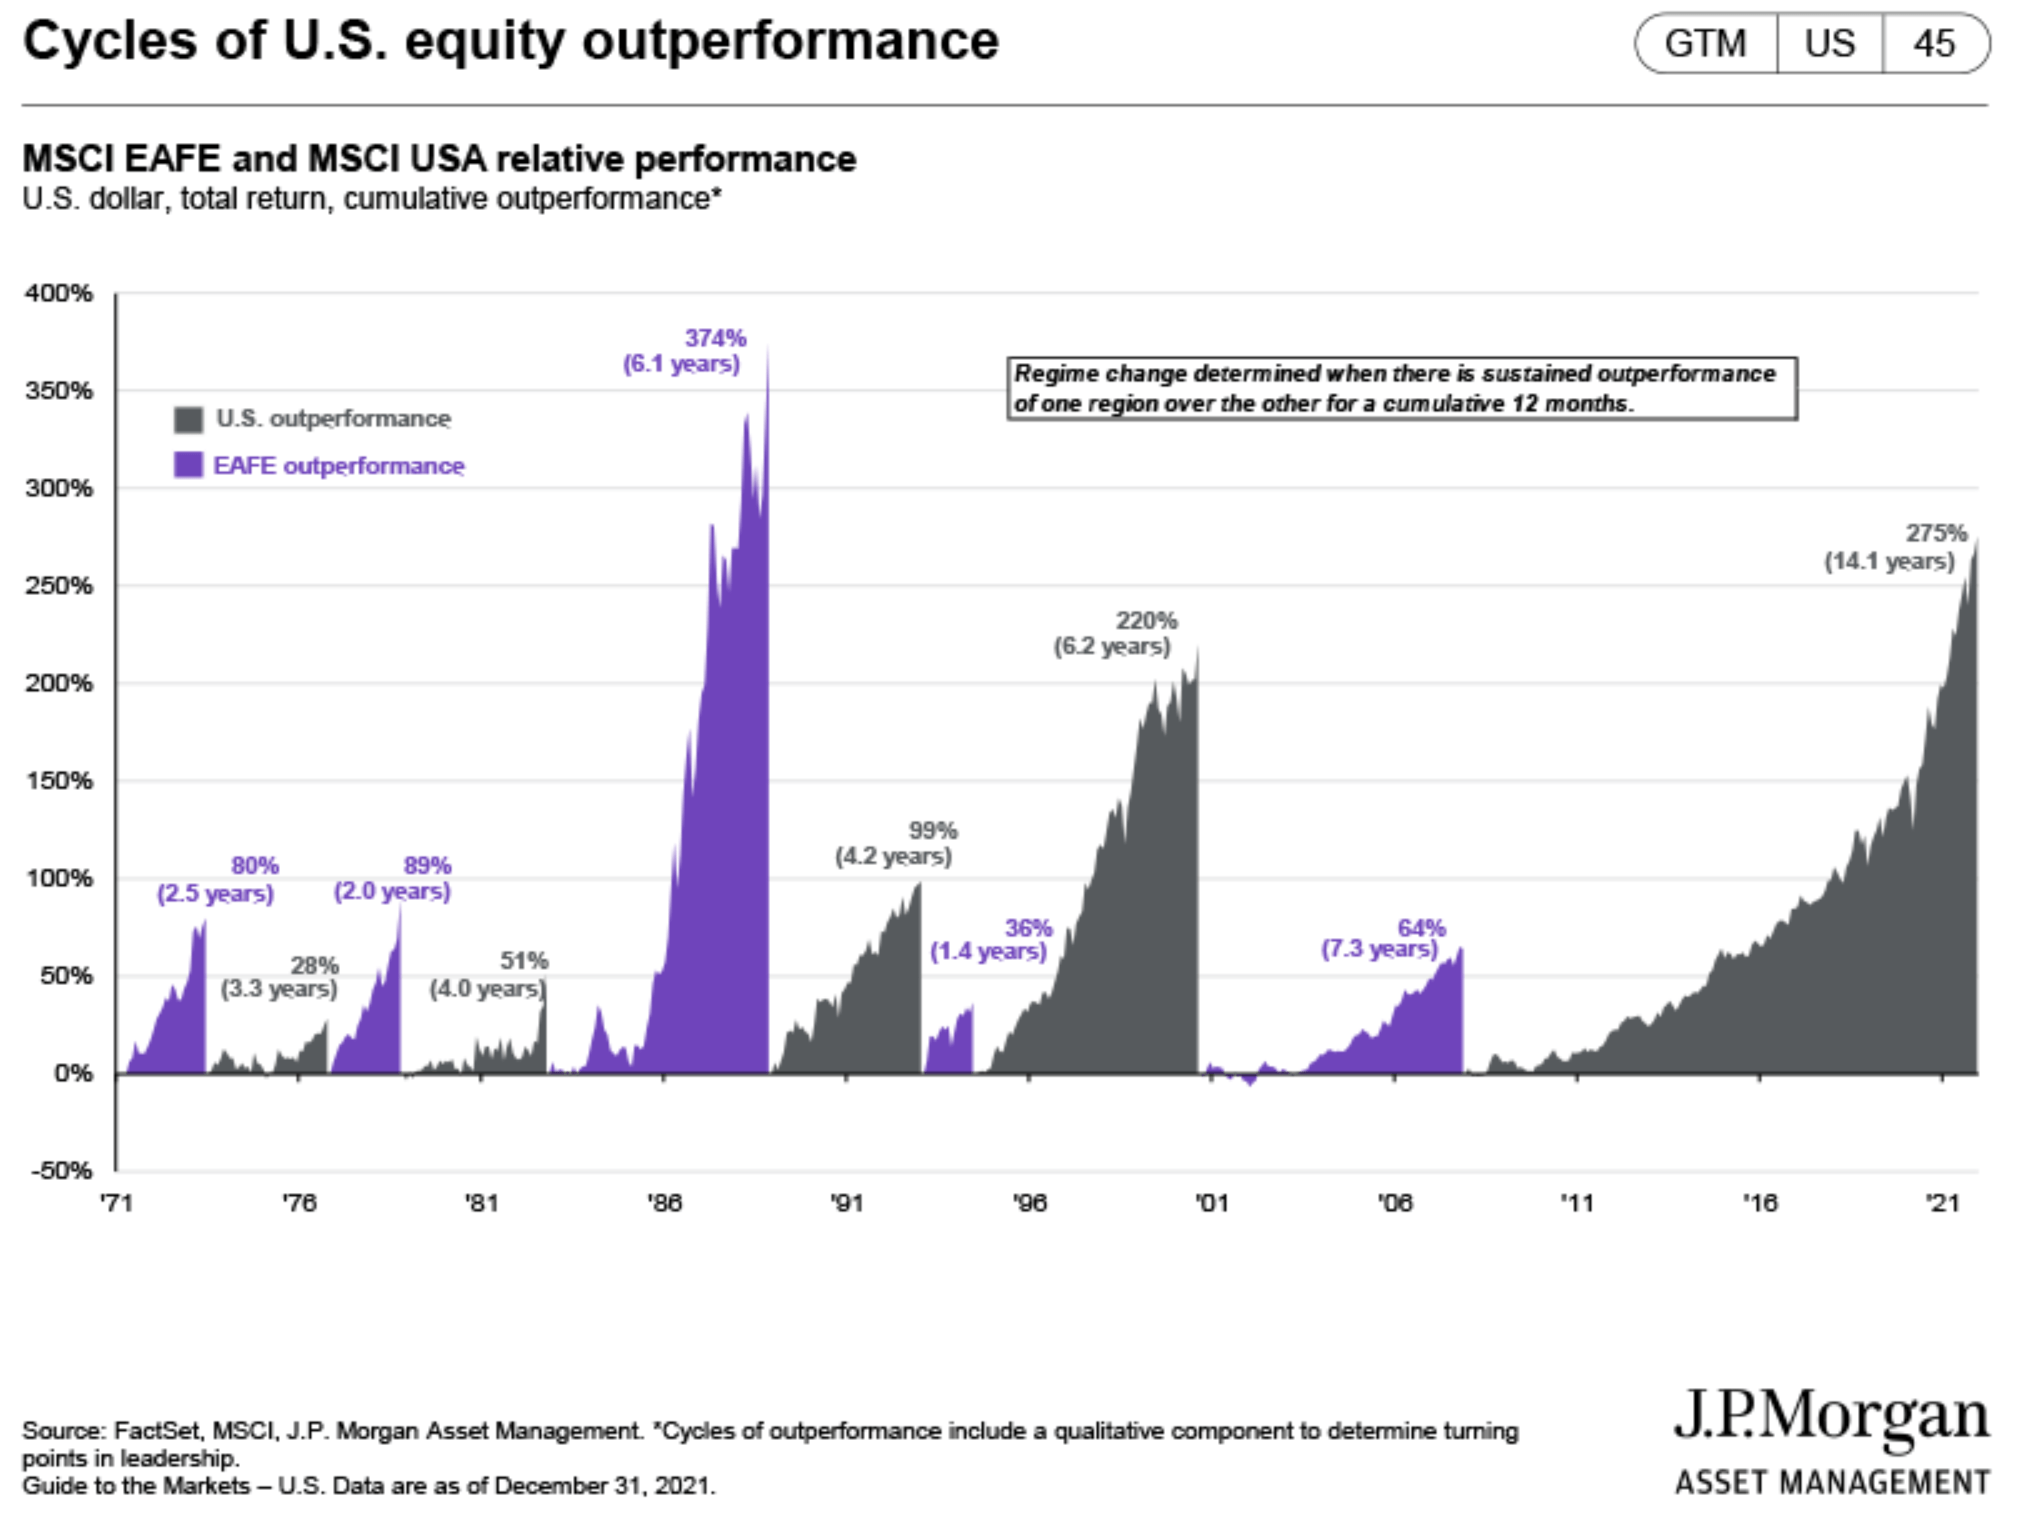 cycles of U.S. equity outperformance 2022